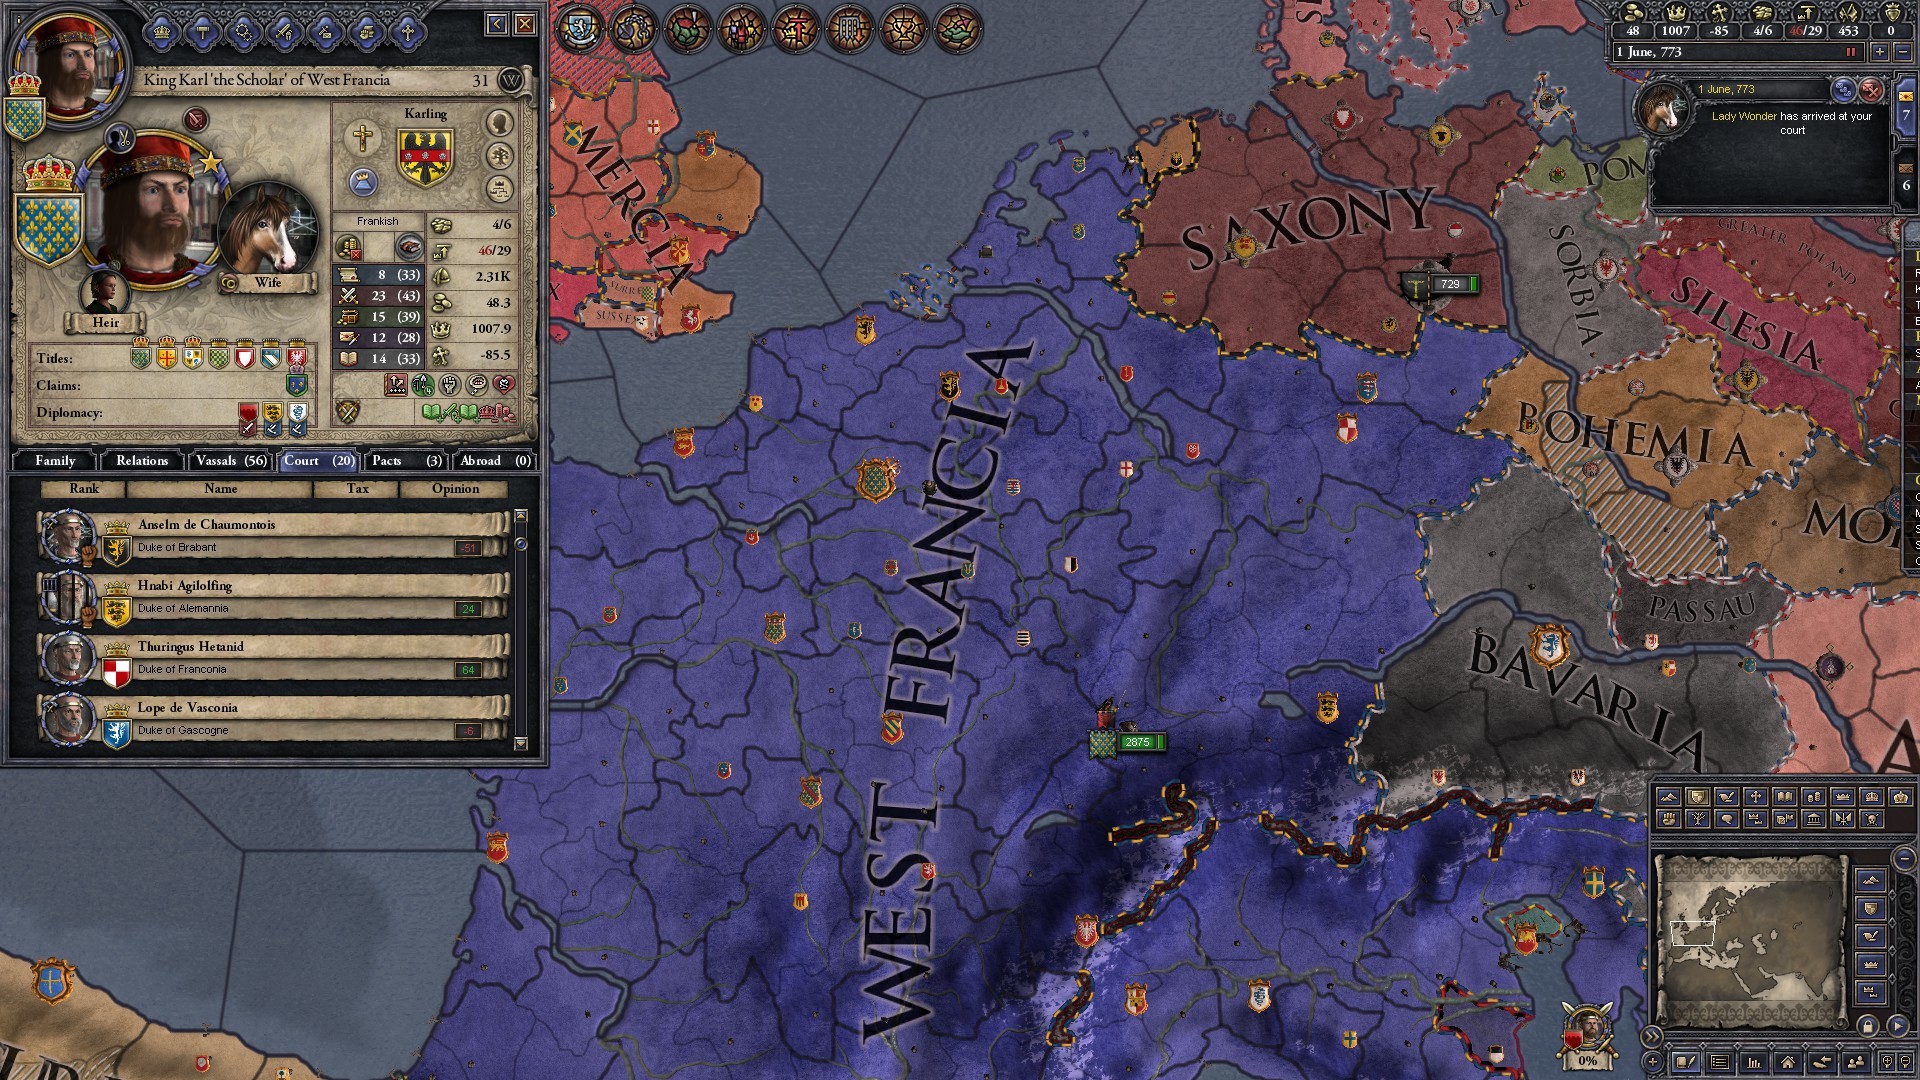 1920x1080 ... they popped out a horse child of the Karling dynasty who could take the  reins and form the Holy Roman Empire. All this was done in Ironman, ...